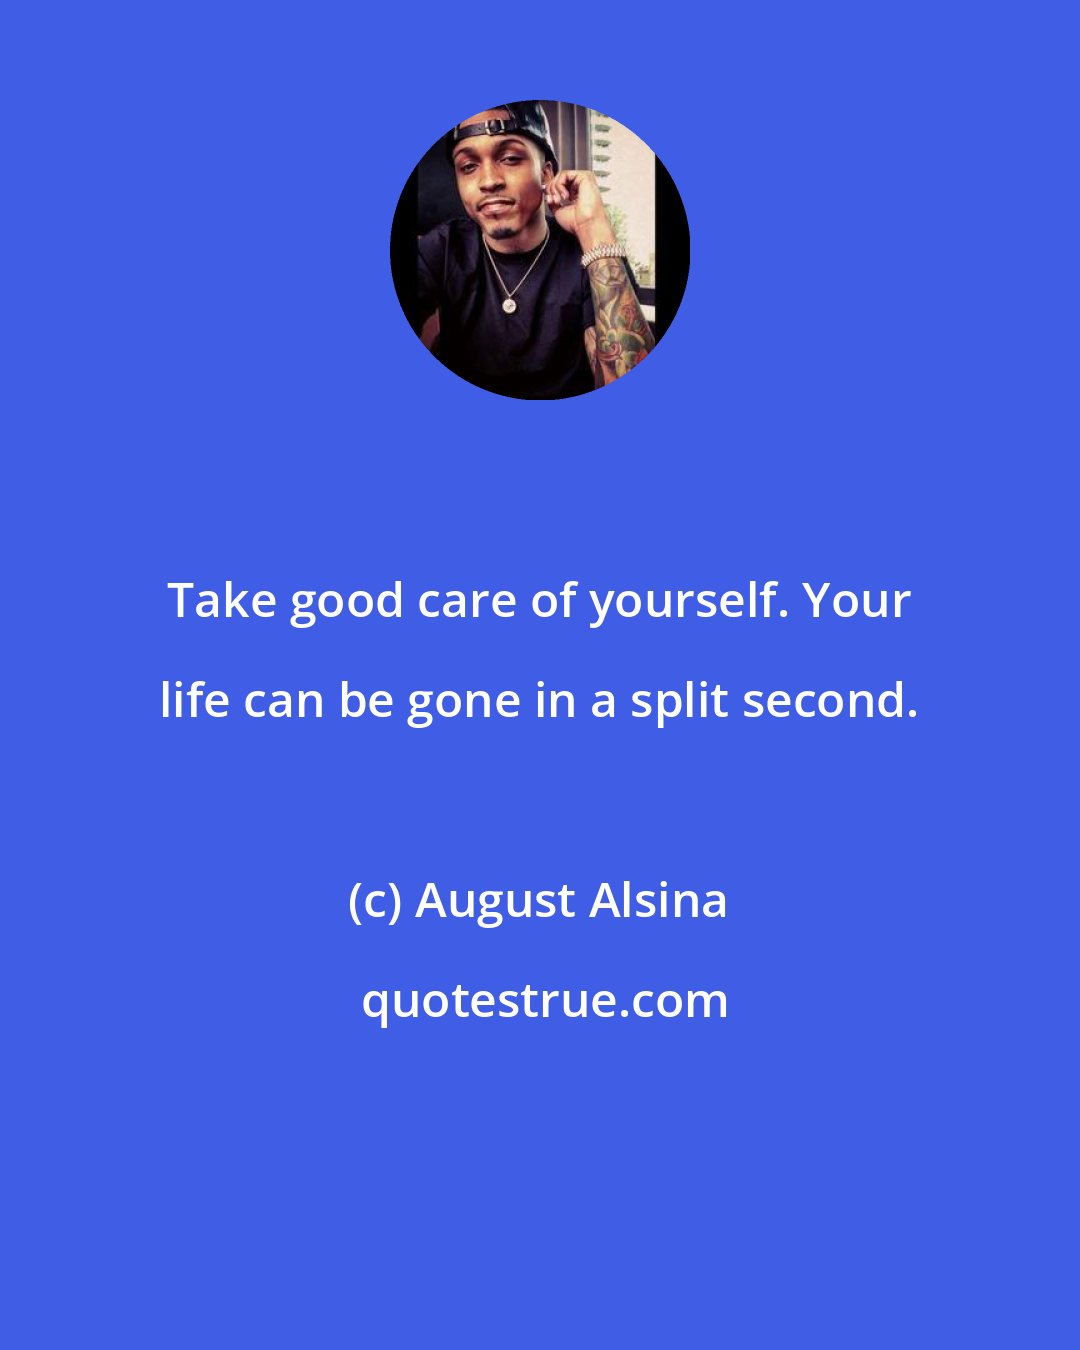 August Alsina: Take good care of yourself. Your life can be gone in a split second.